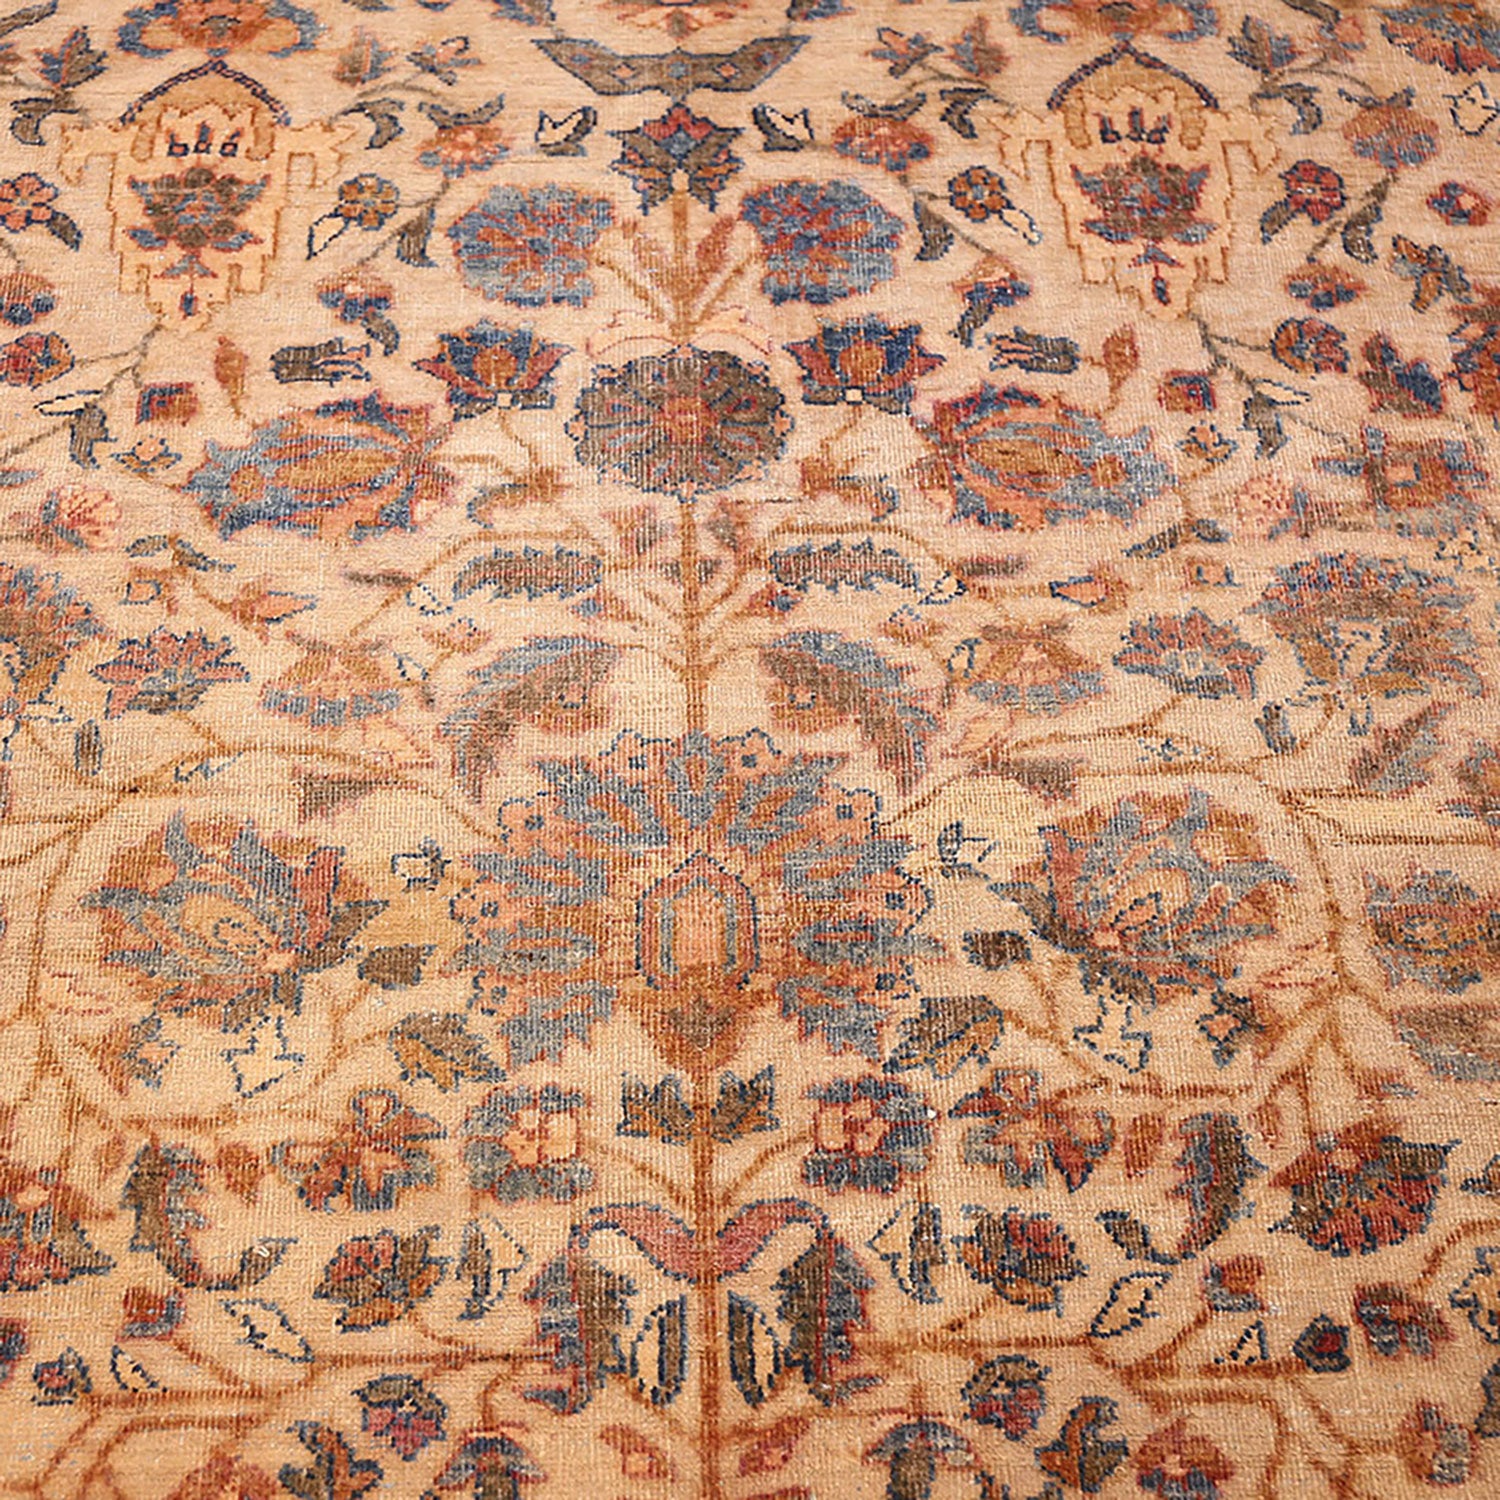 Vintage-style carpet with symmetrical floral motifs in warm, faded colors.